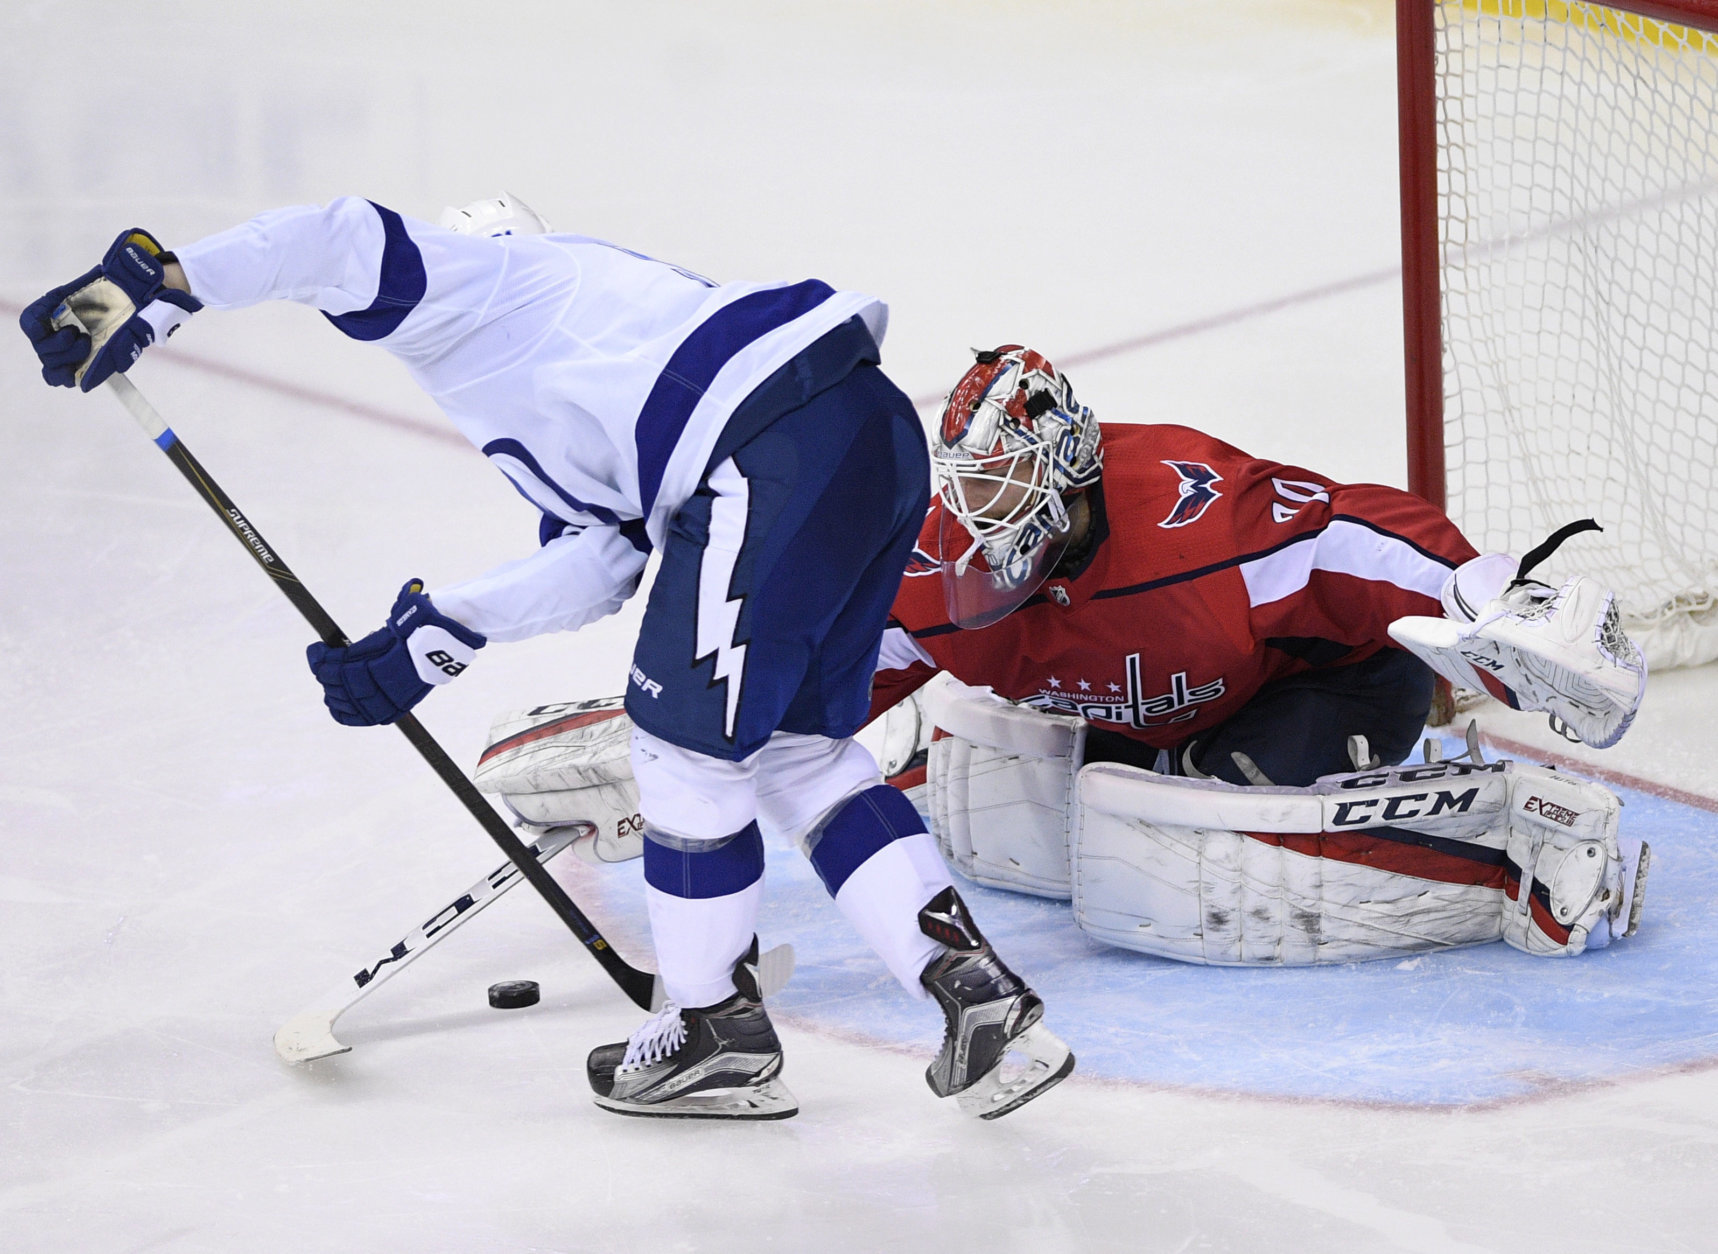 Lightning enters Capitals matchup donning “lucky” nicknames and jerseys